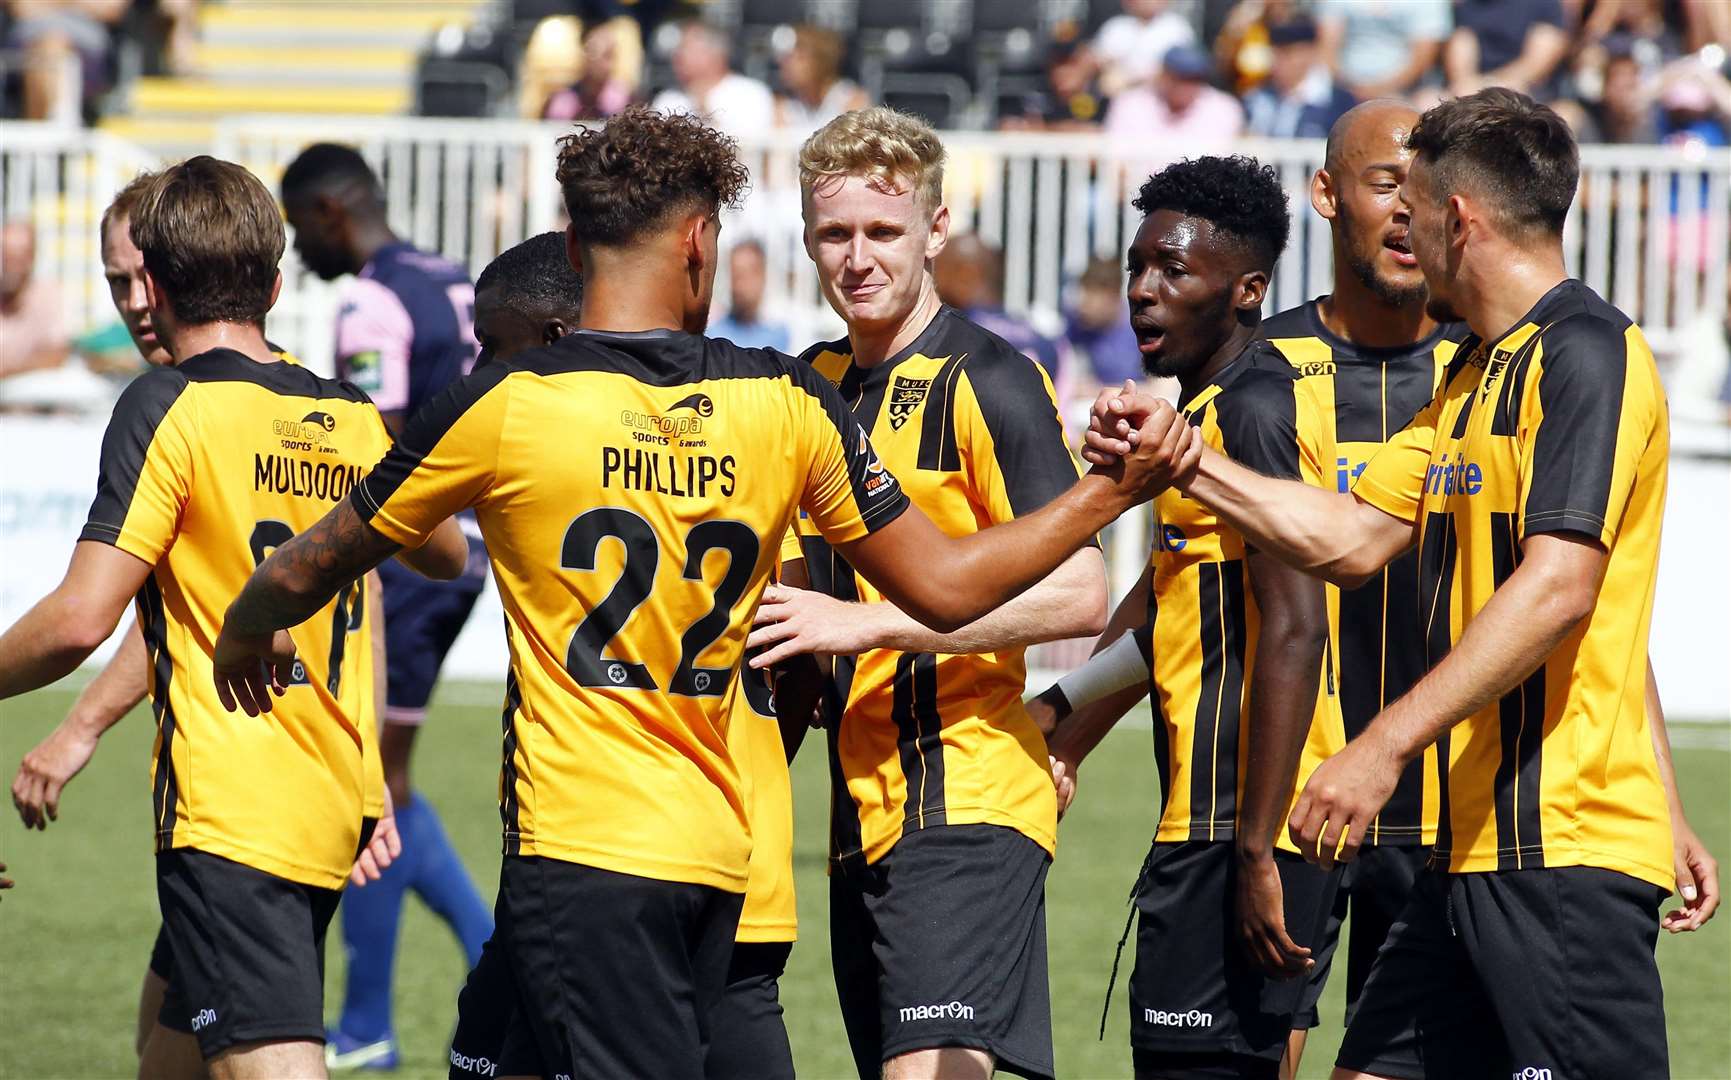 An exciting young Maidstone side are ready to fire Picture: Sean Aidan